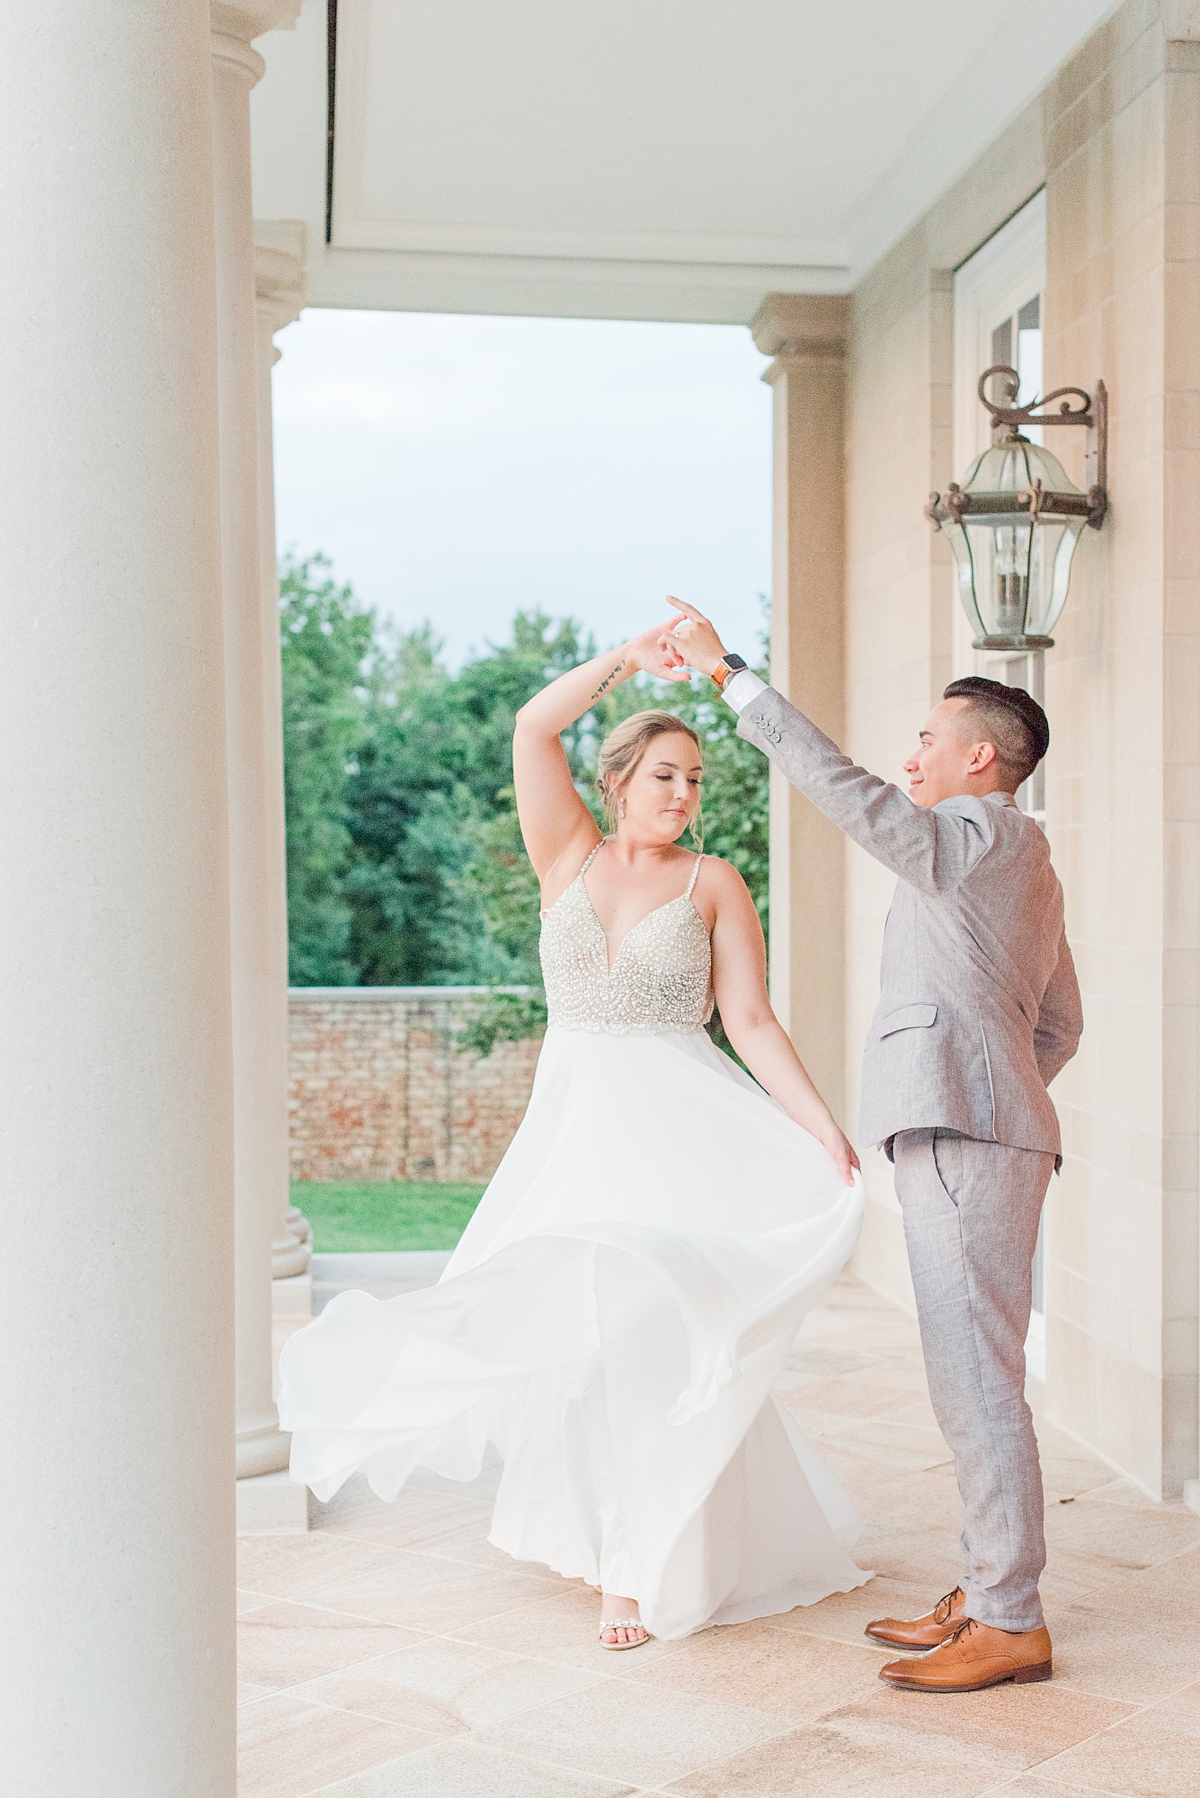 Twirling Bride and Groom Portraits in Reception Dress with a Mountain View at a Grace Estate Winery Wedding. Wedding Photography by Richmond Wedding Photographer Kailey Brianne Photography.